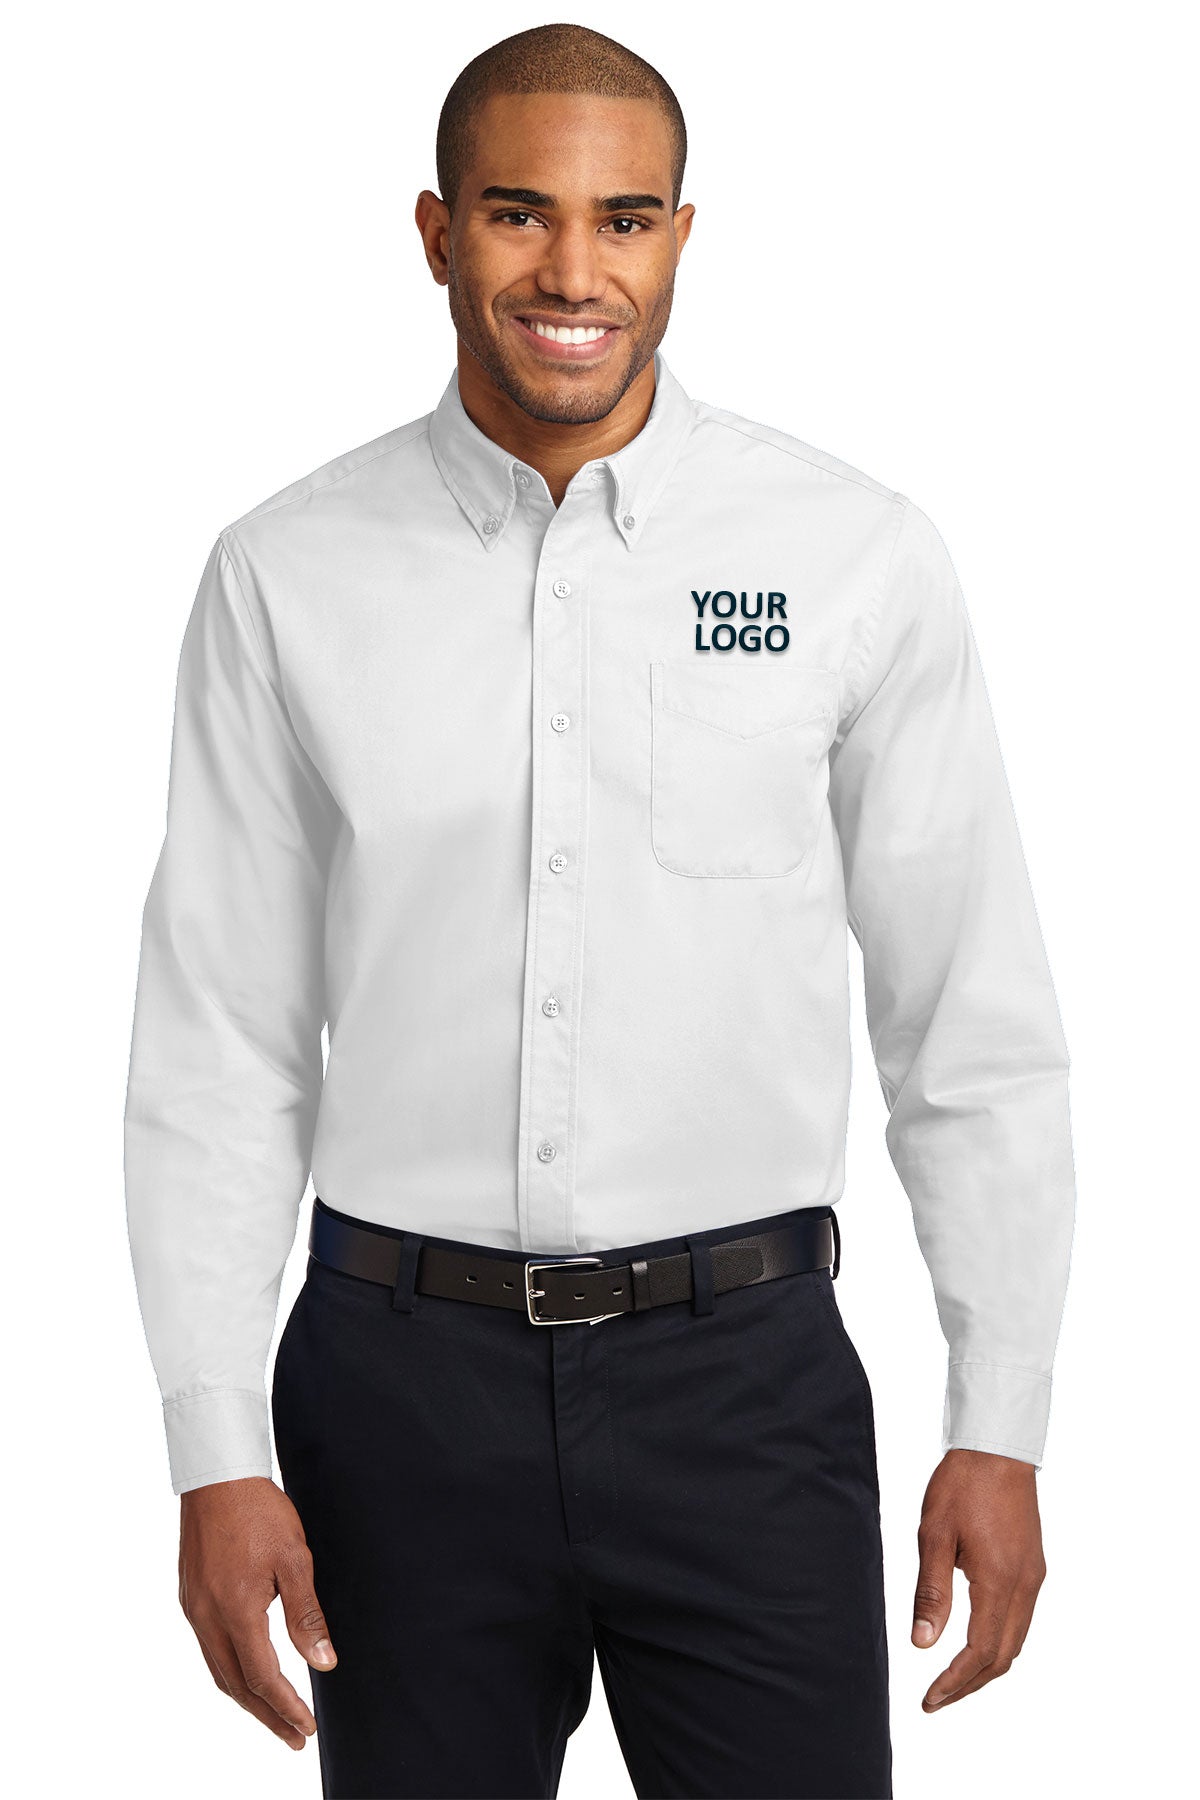 Port Authority White/ Light Stone S608 business shirts with company logo